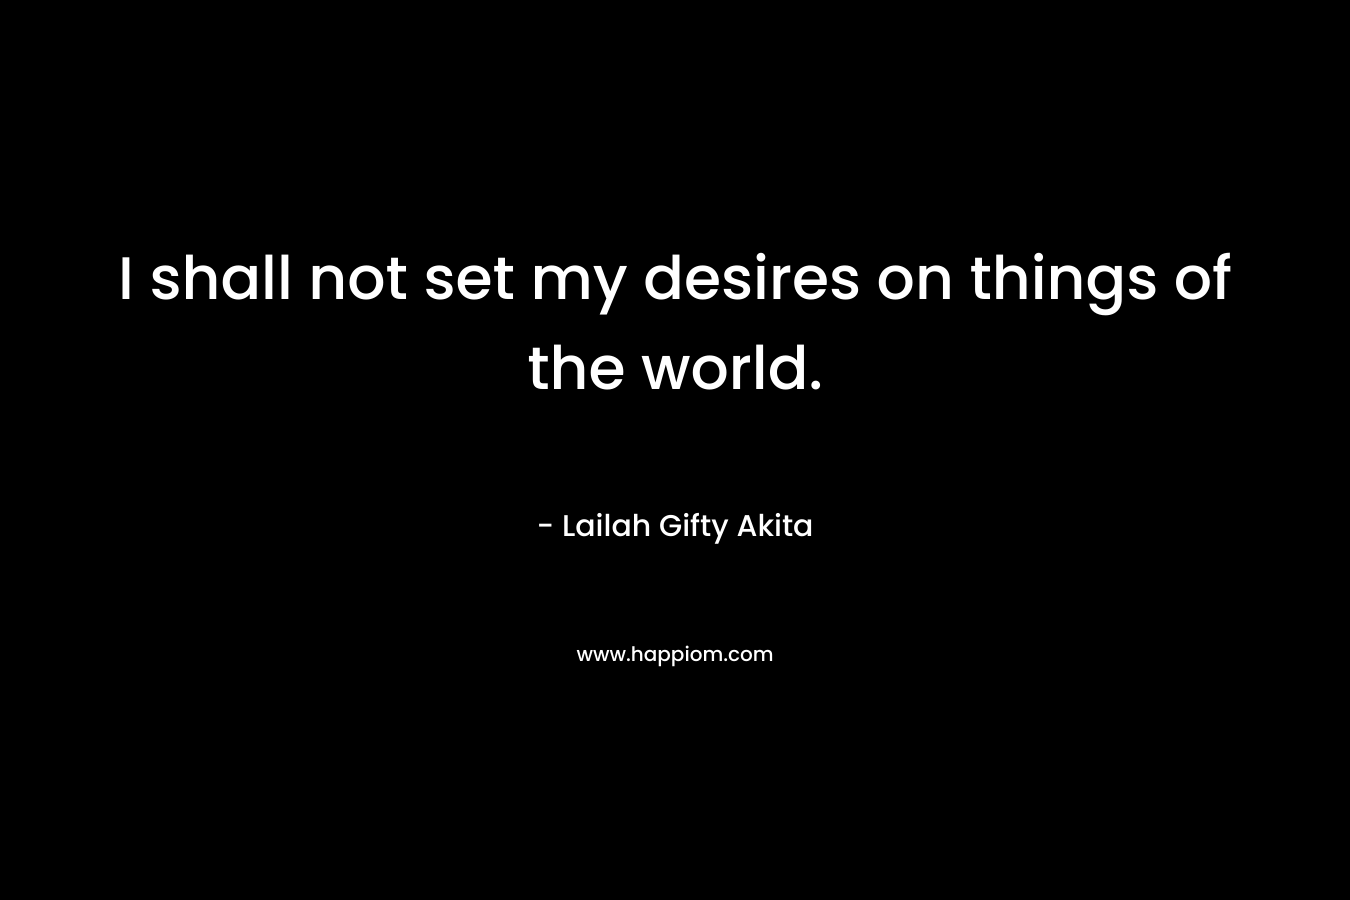 I shall not set my desires on things of the world.